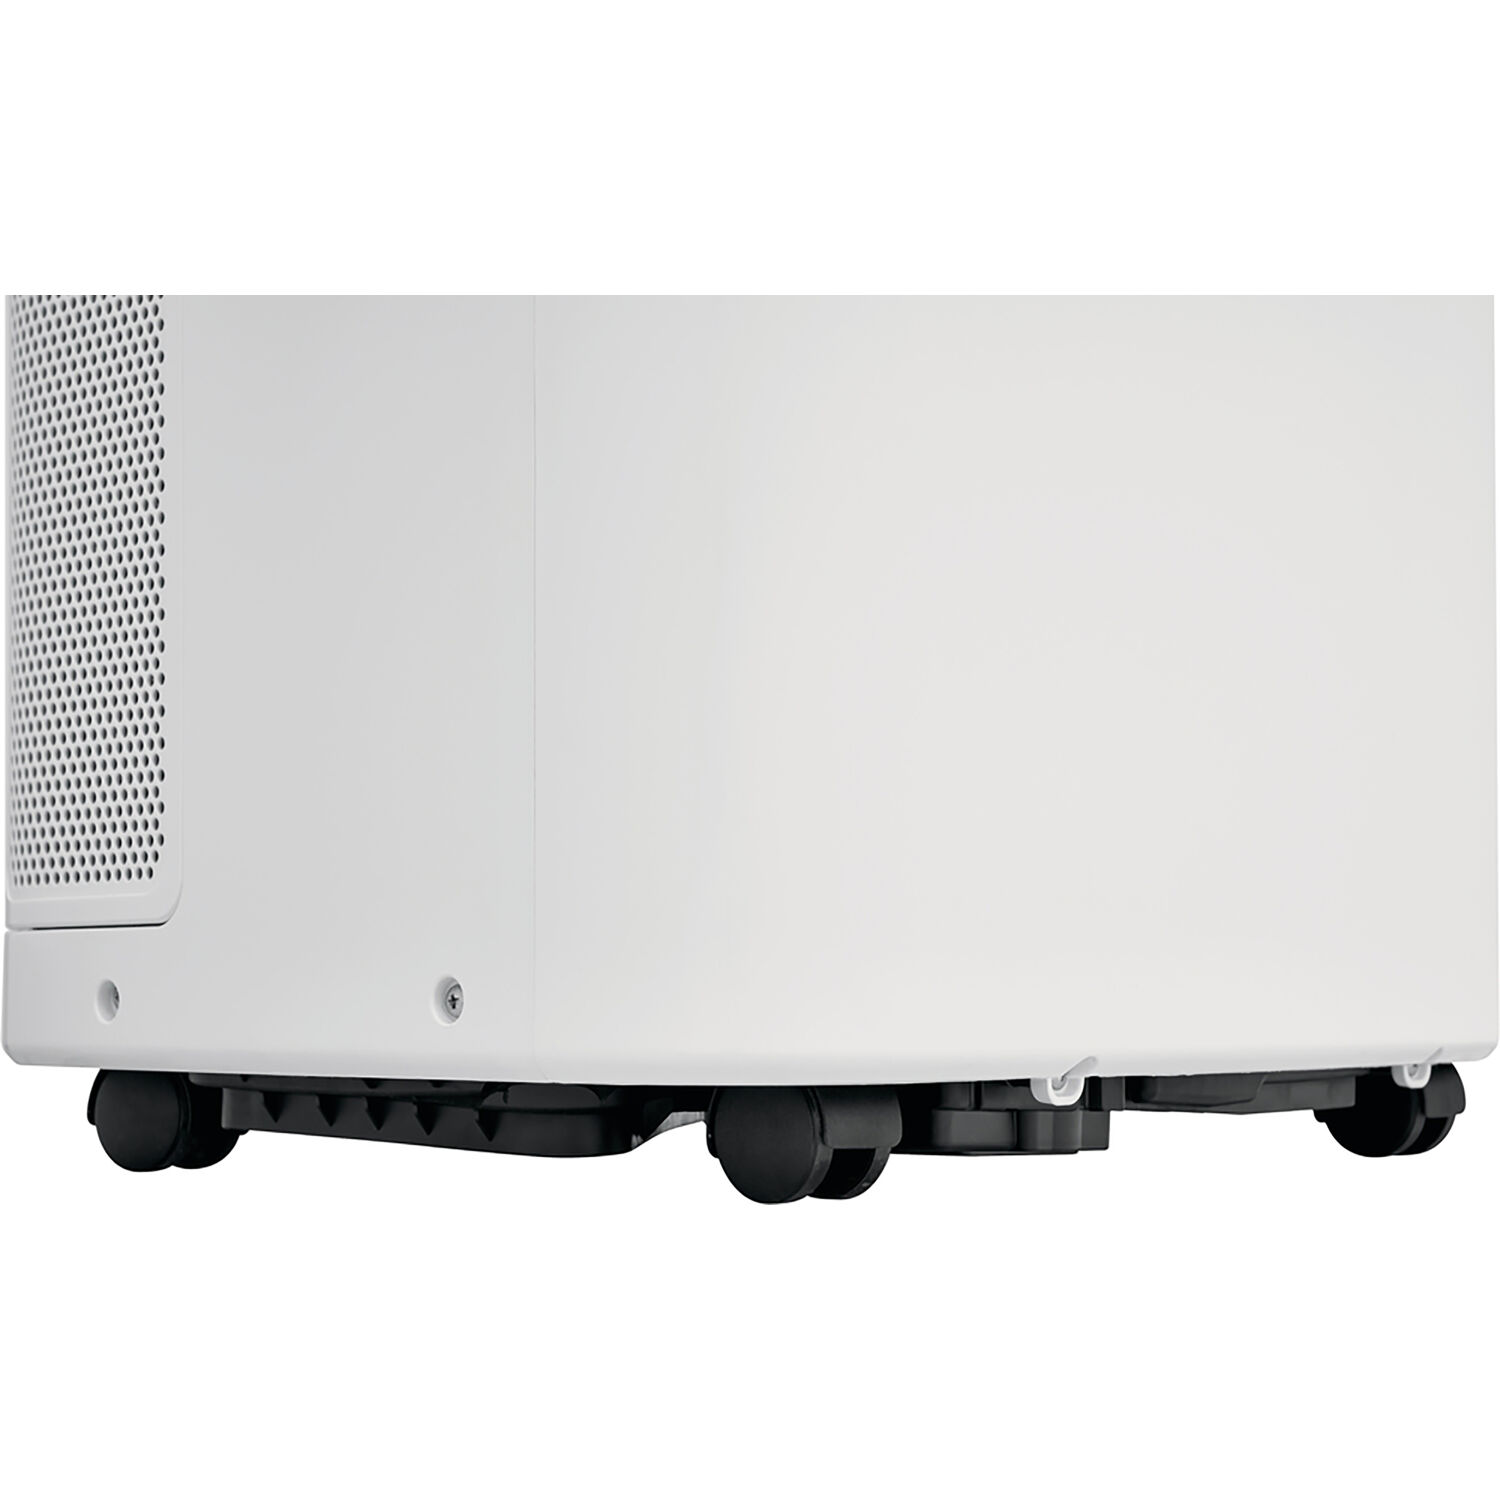 Frigidaire Cool Connect Smart Portable Air Conditioner with Wi-Fi Control for a Room up to 600-Sq. Ft. - image 3 of 14